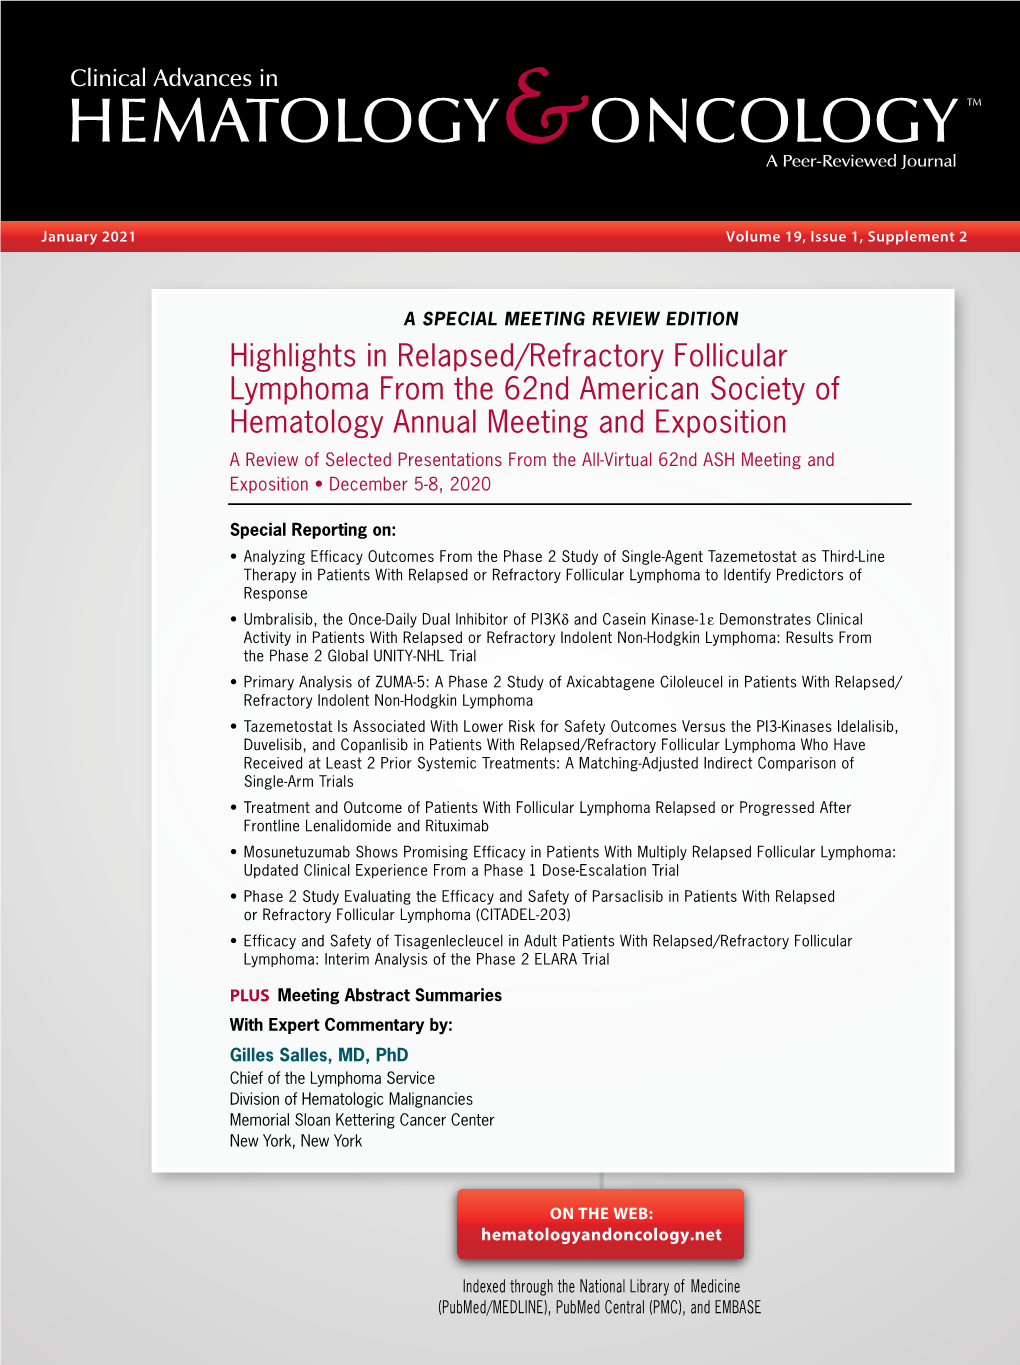 Highlights in Relapsed/Refractory Follicular Lymphoma from The